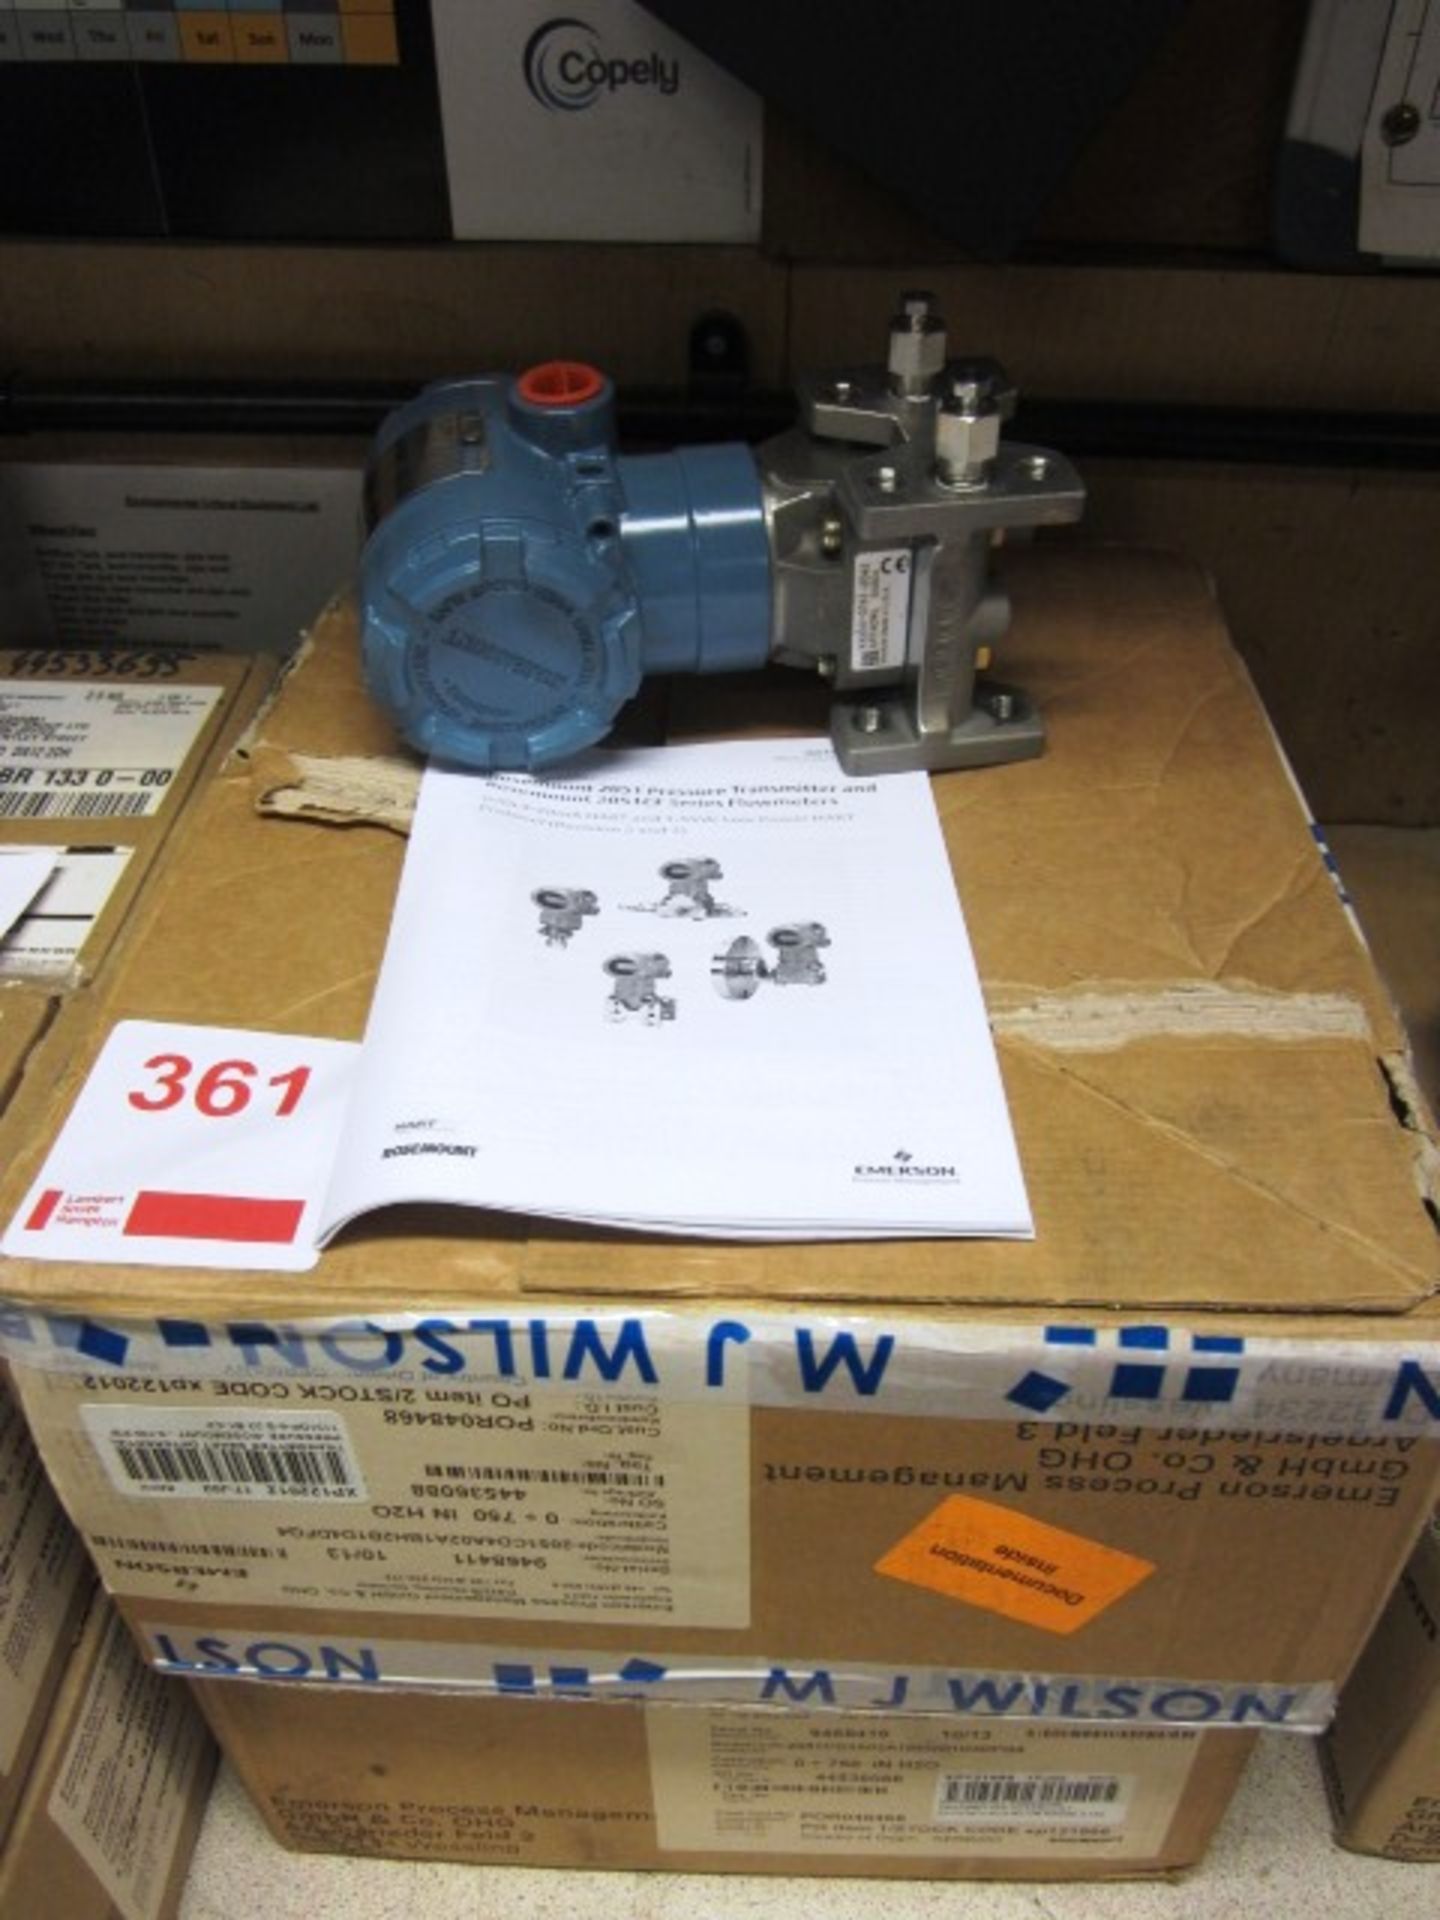 2x Rosemount 2051 pressure transmitter (Please note: this lot must be collected on Tuesday 2nd